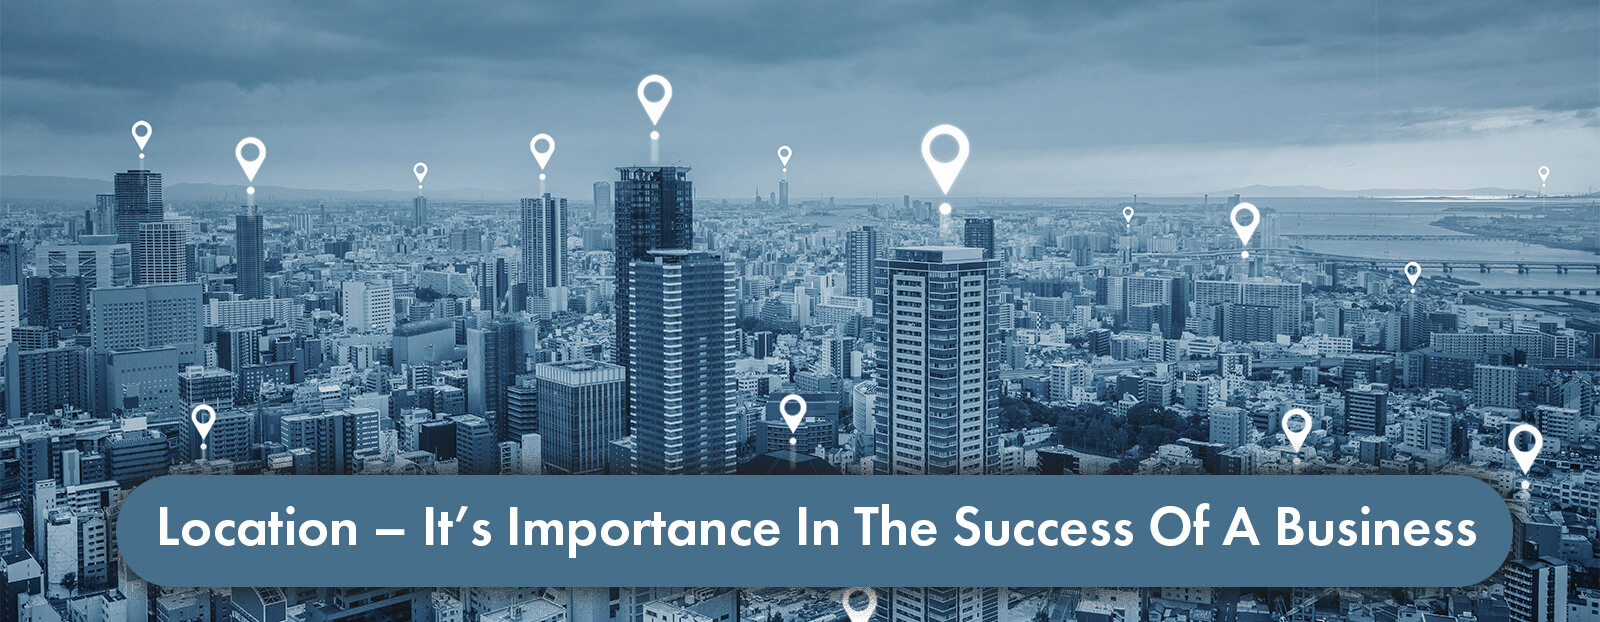 Location – It’s Importance In The Success Of A Business